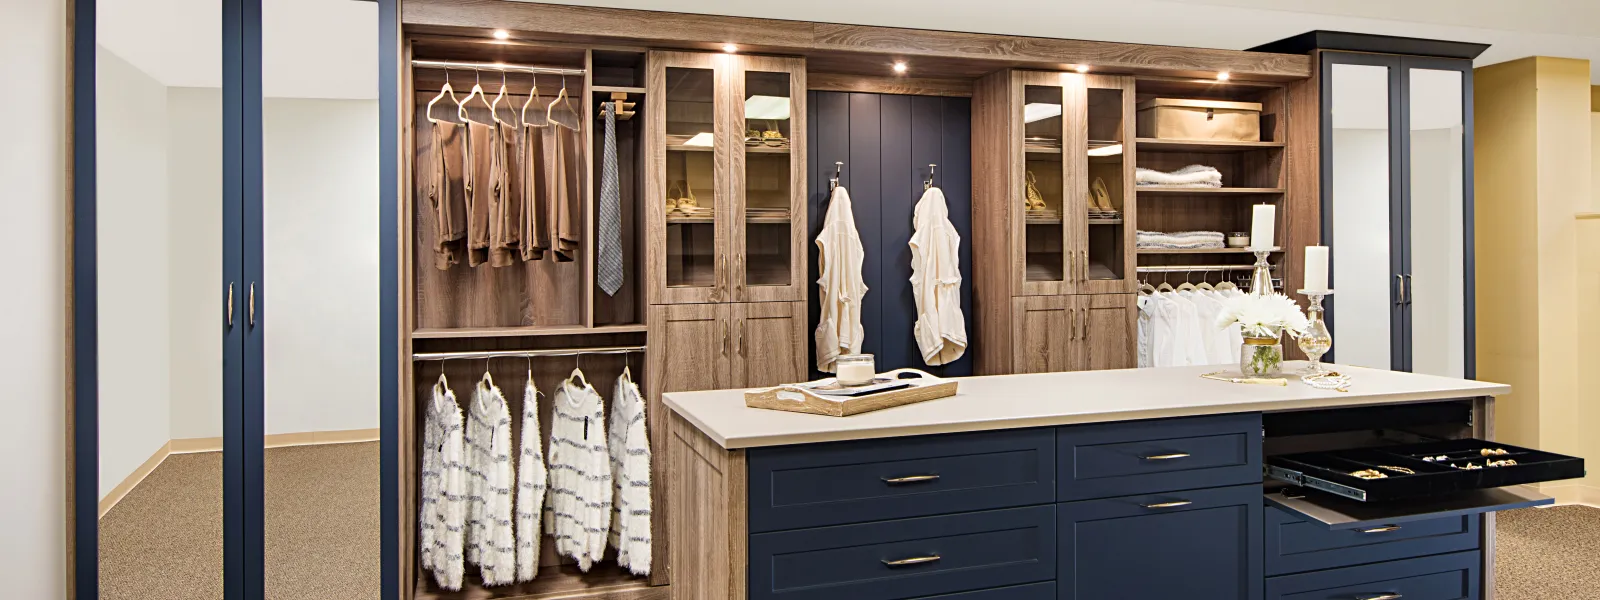 Closet Trends From Architectural Digest's Closet Finalists